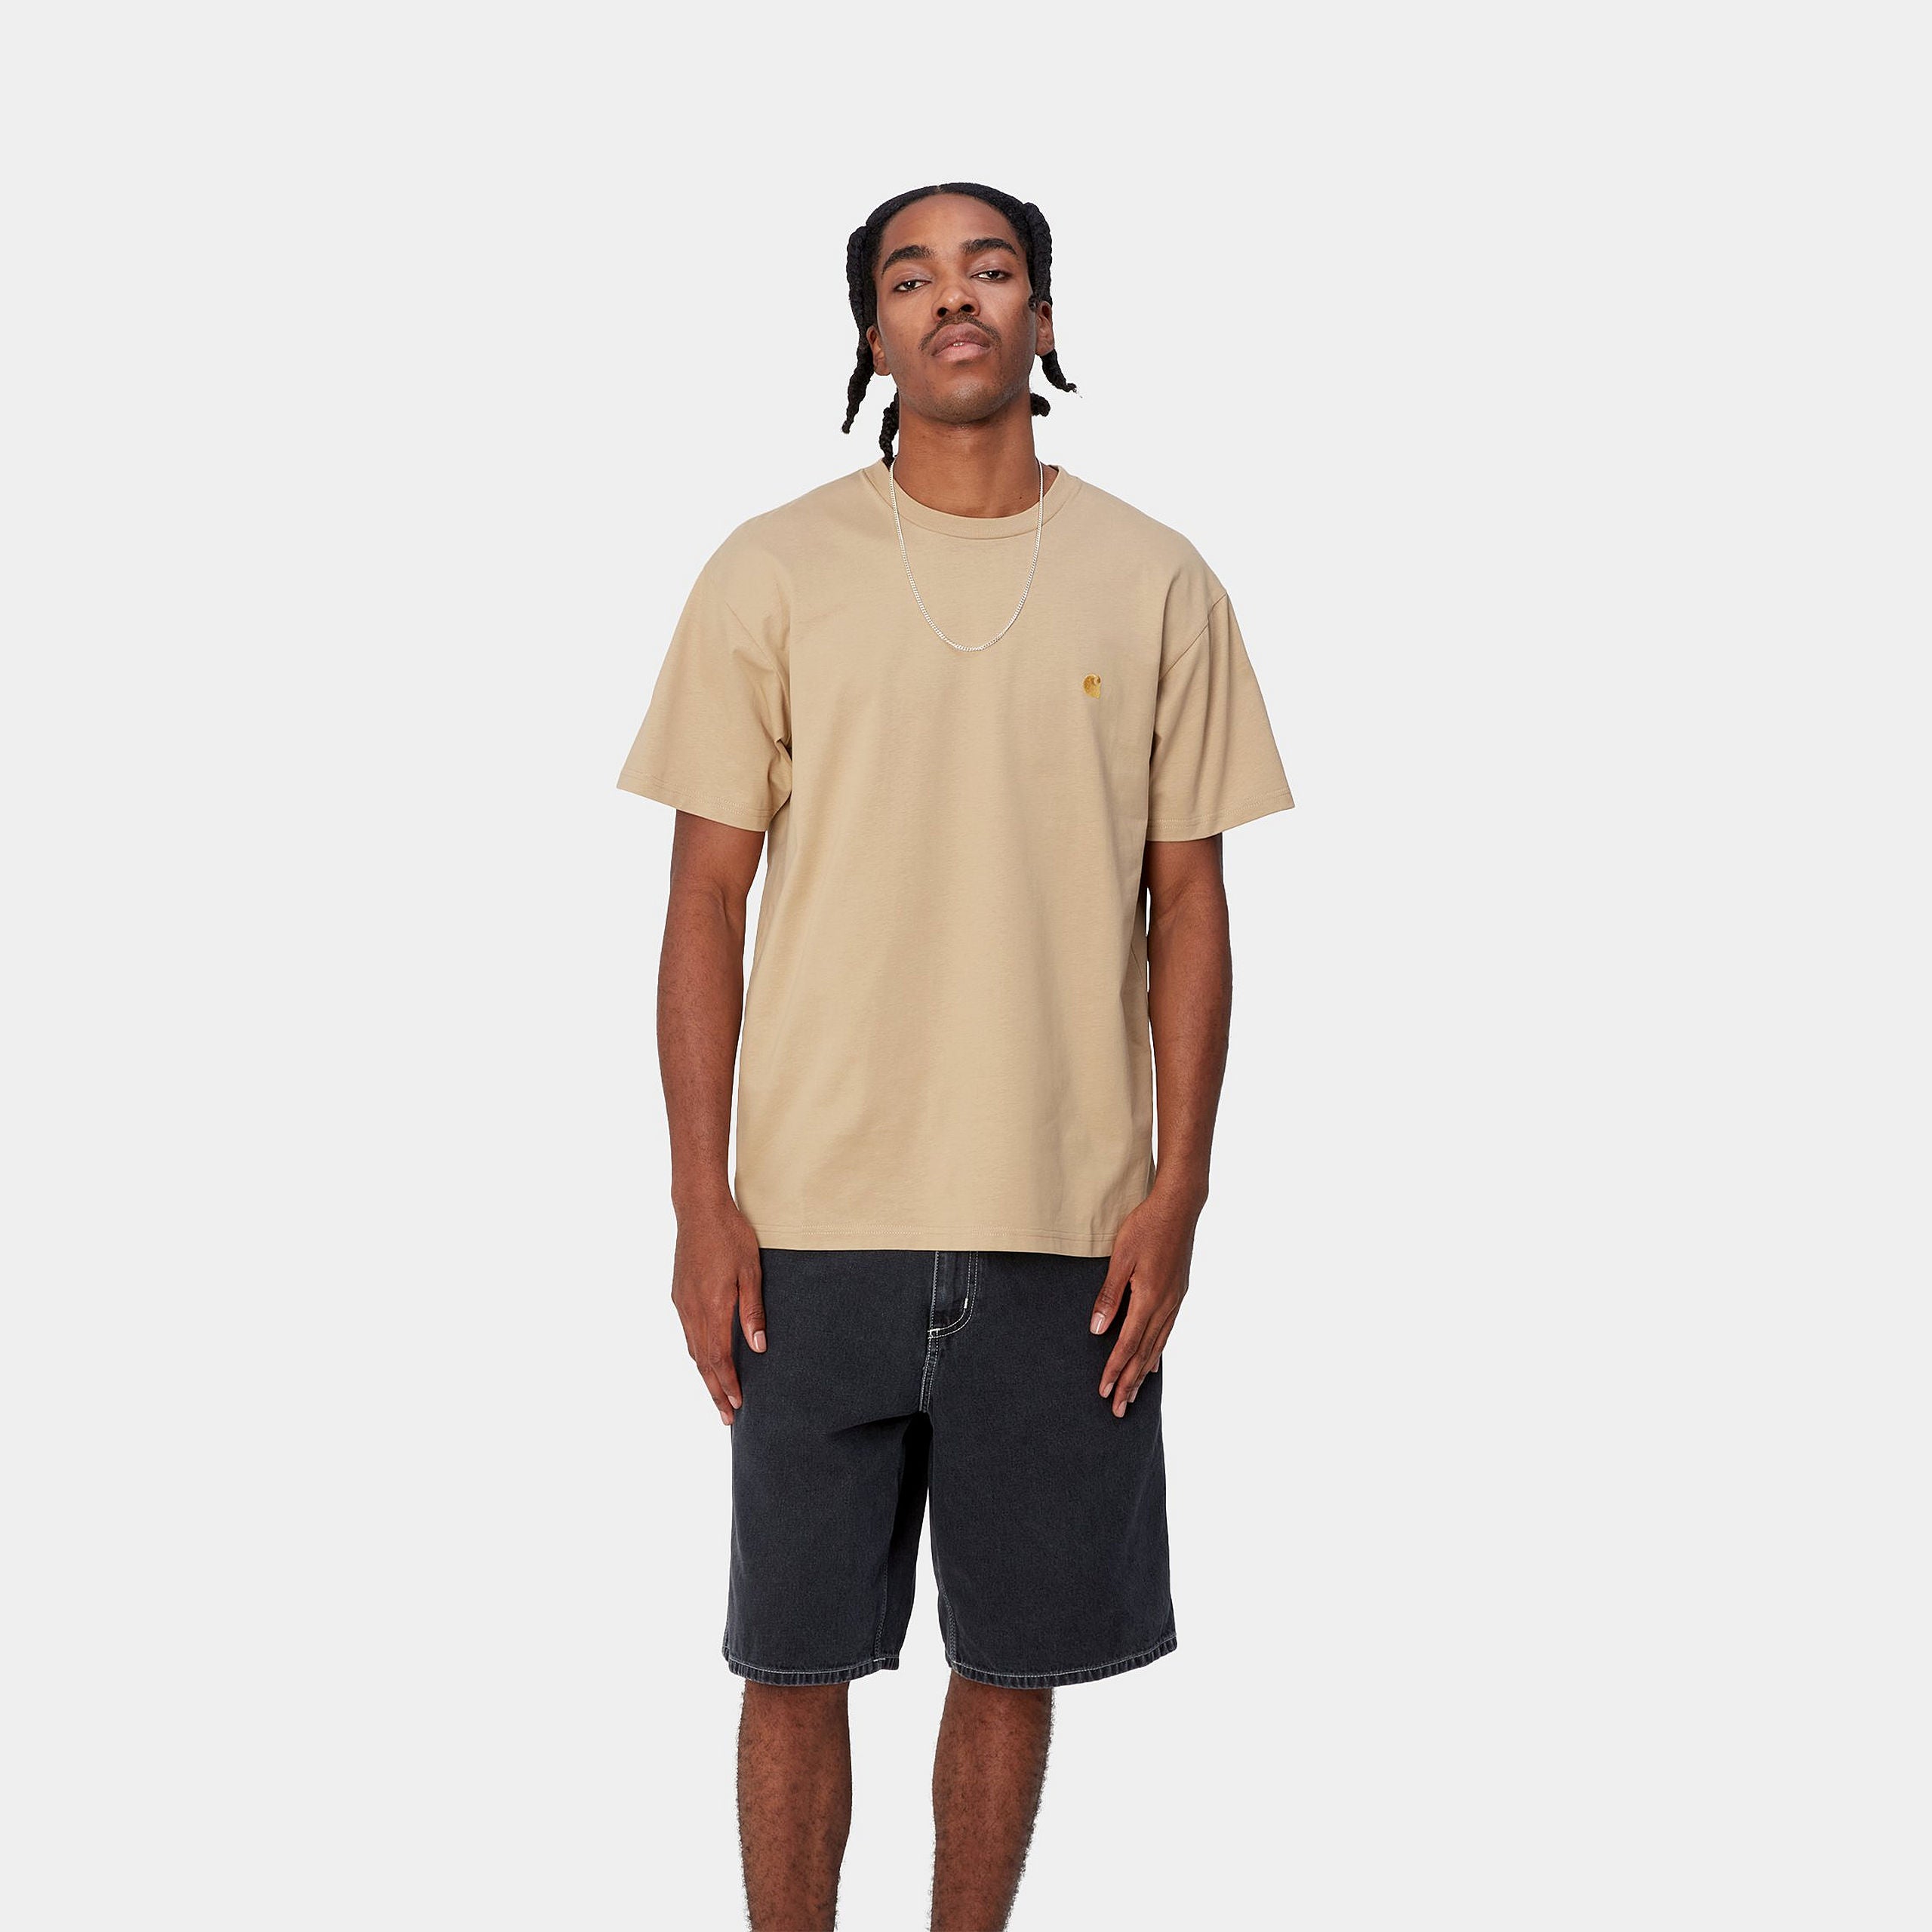 S/S CHASE T-SHIRT - Sable / Gold